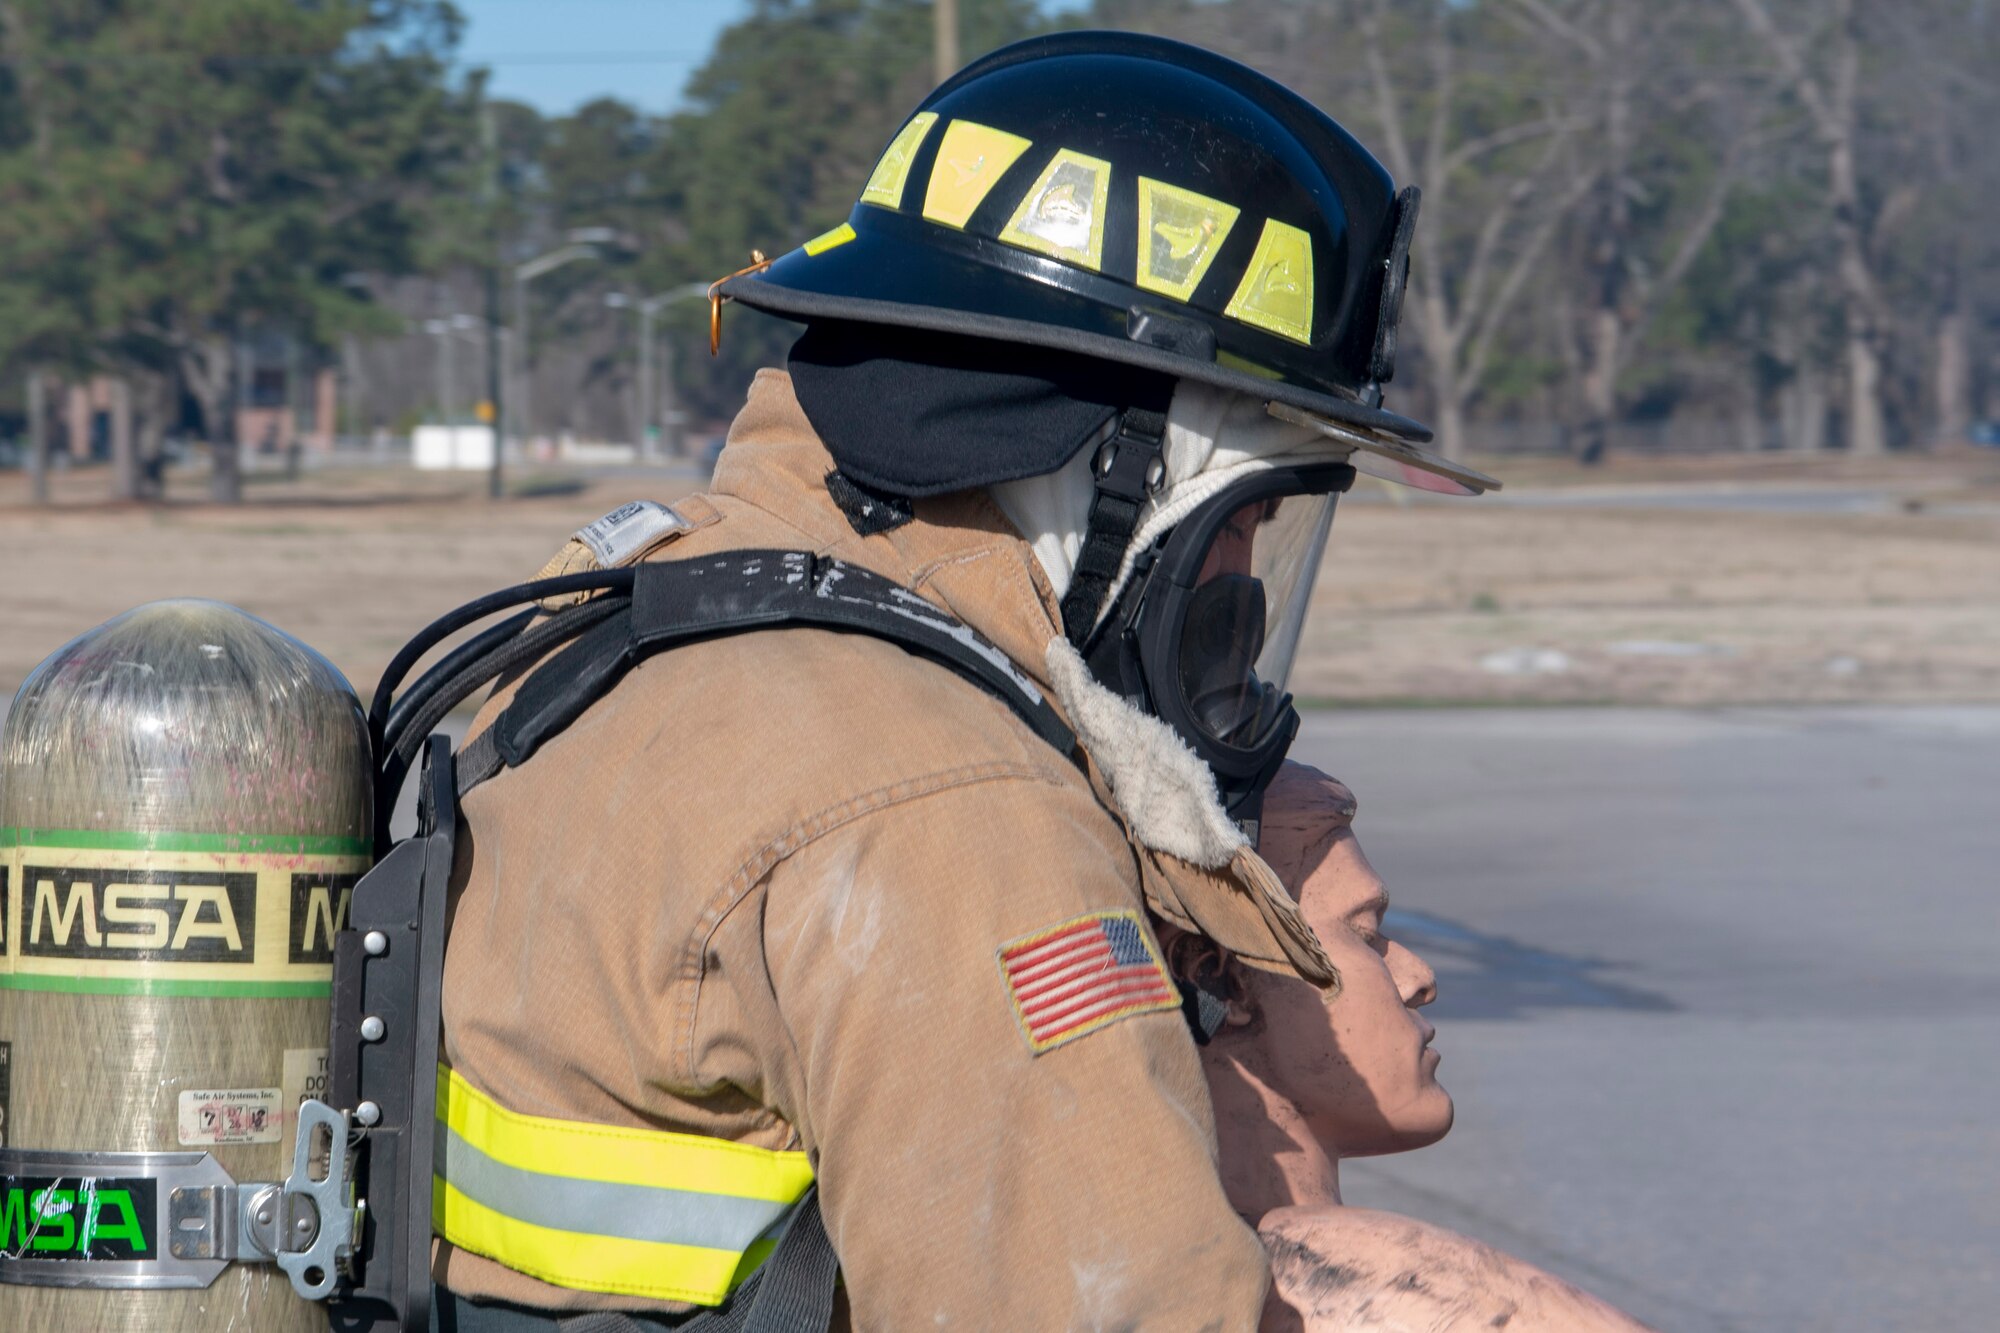 U.S. Air Force Senior Airman Kyler Rogers-McCoy, a 916th Civil Engineer Flight firefighter, executes a firefighter technique to remove a simulated victim from the Immediate Dangerous to Life or Health (IDLH) environment on Seymour Johnson Air Force Base, North Carolina, Jan. 9, 2020. Victims are removed from the IDLH to prevent inhalation of harmful carcinogens. (U.S. Air Force photo by Staff Sgt. Mary McKnight)